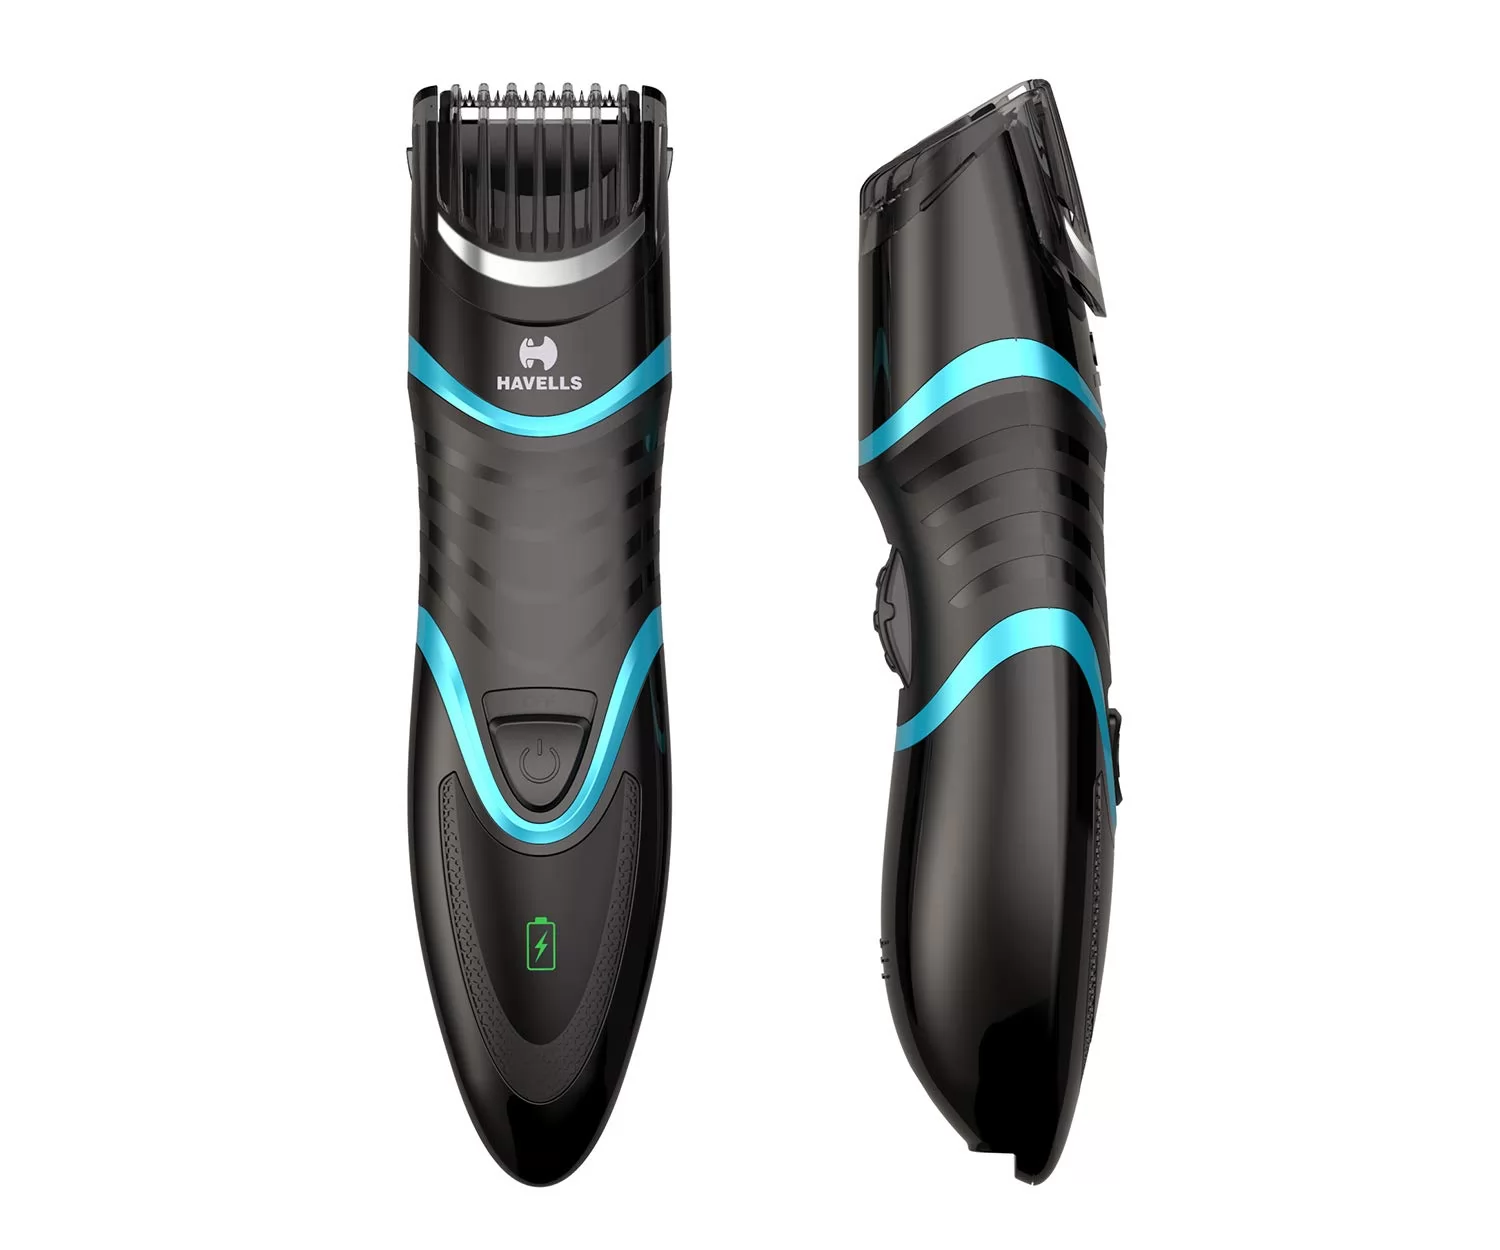 Havell’s BT9005 Cord & Cordless Adjustable Beard Trimmer